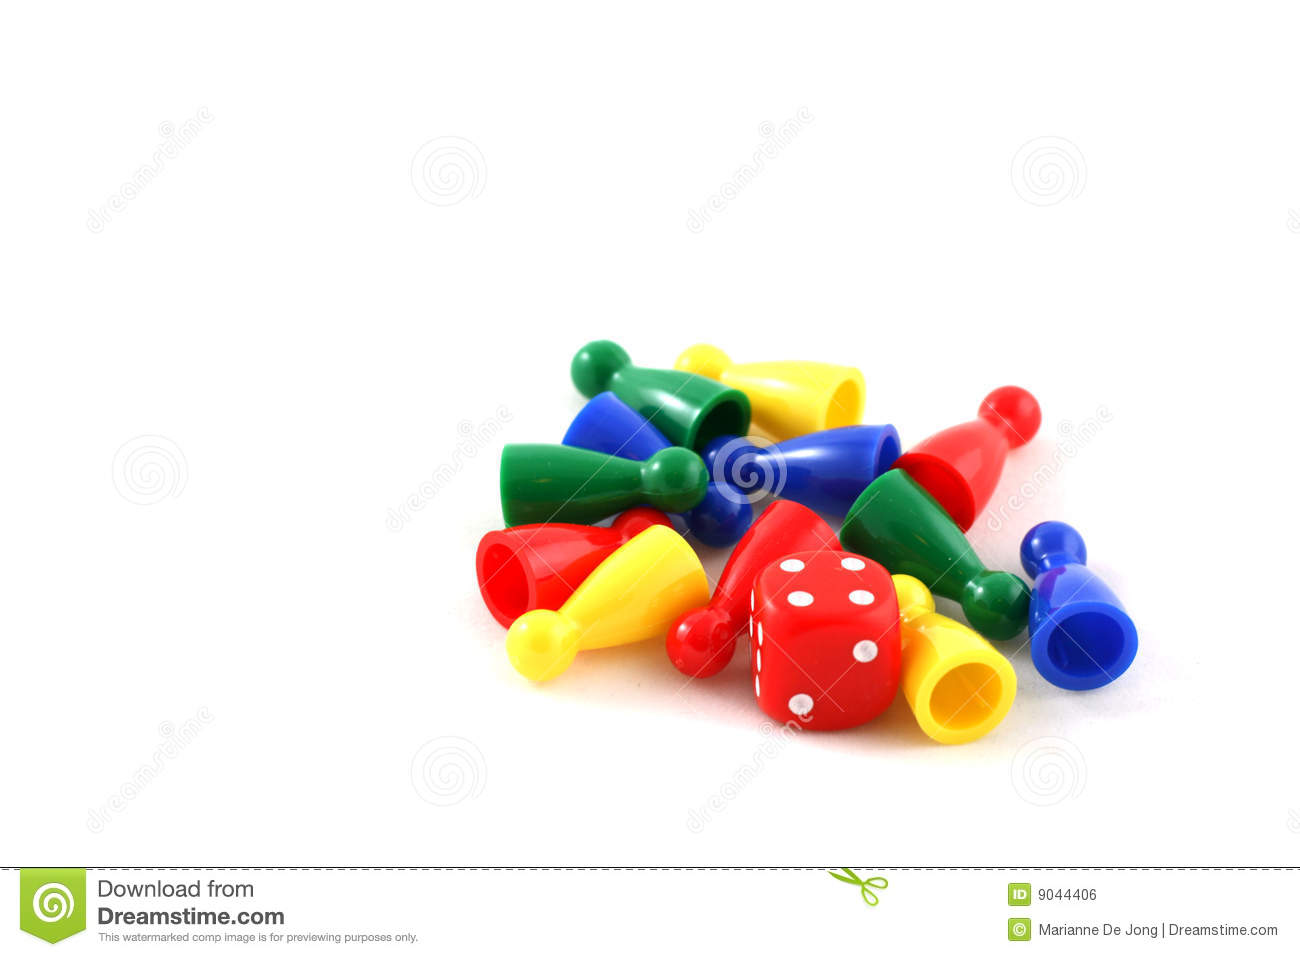 Boardgame Pieces Royalty Free Stock Image   Image  9044406